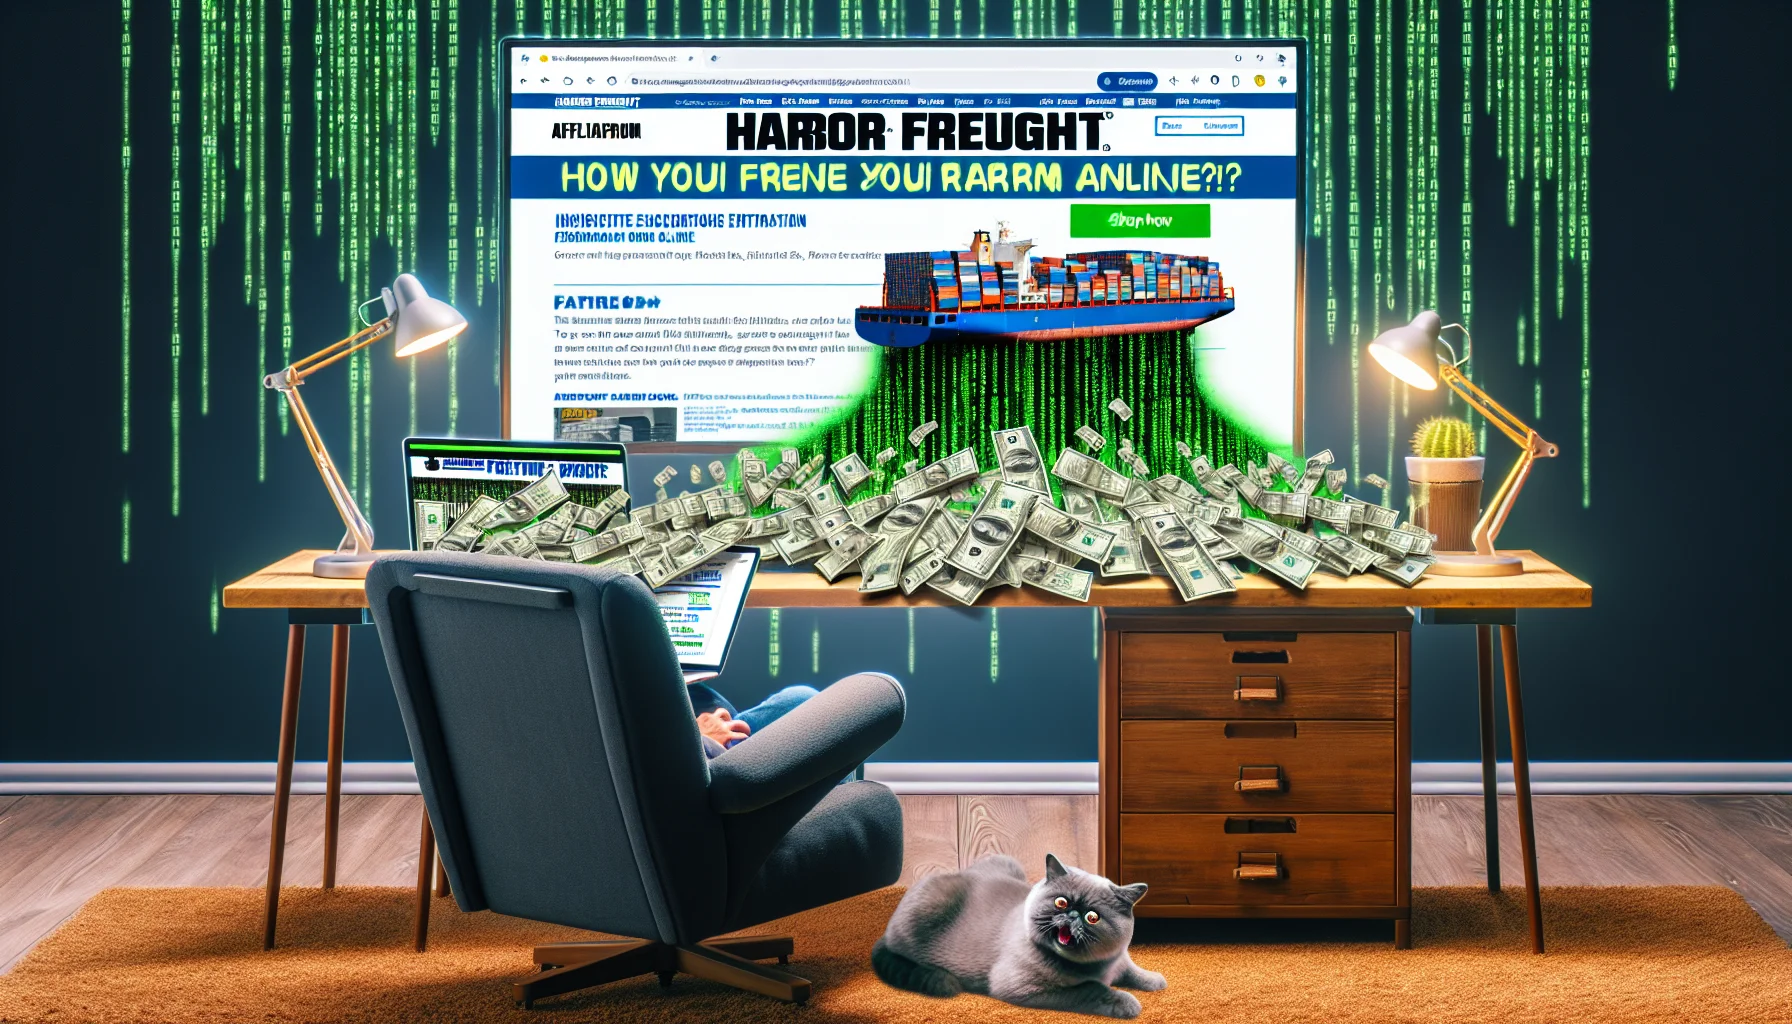 Create an amusing and realistic image that showcases the Harbor Freight affiliate program. Incorporate computer screens displaying infectious enthusiasm about the potential to earn online. Include a stack of dollar bills growing larger as they digitally flow from the computer screens, using a matrix-style binary flow to represent the transmission of money. Surround this setup with an enticing situation, such as a cozy home office setting that includes elements of comfort and relaxation like a plush office chair, a hot cup of coffee, and a purring pet cat at the feet of the office chair. Prominently place the Harbor Freight logo on top of the affiliate partners' webpage on one of the screens.